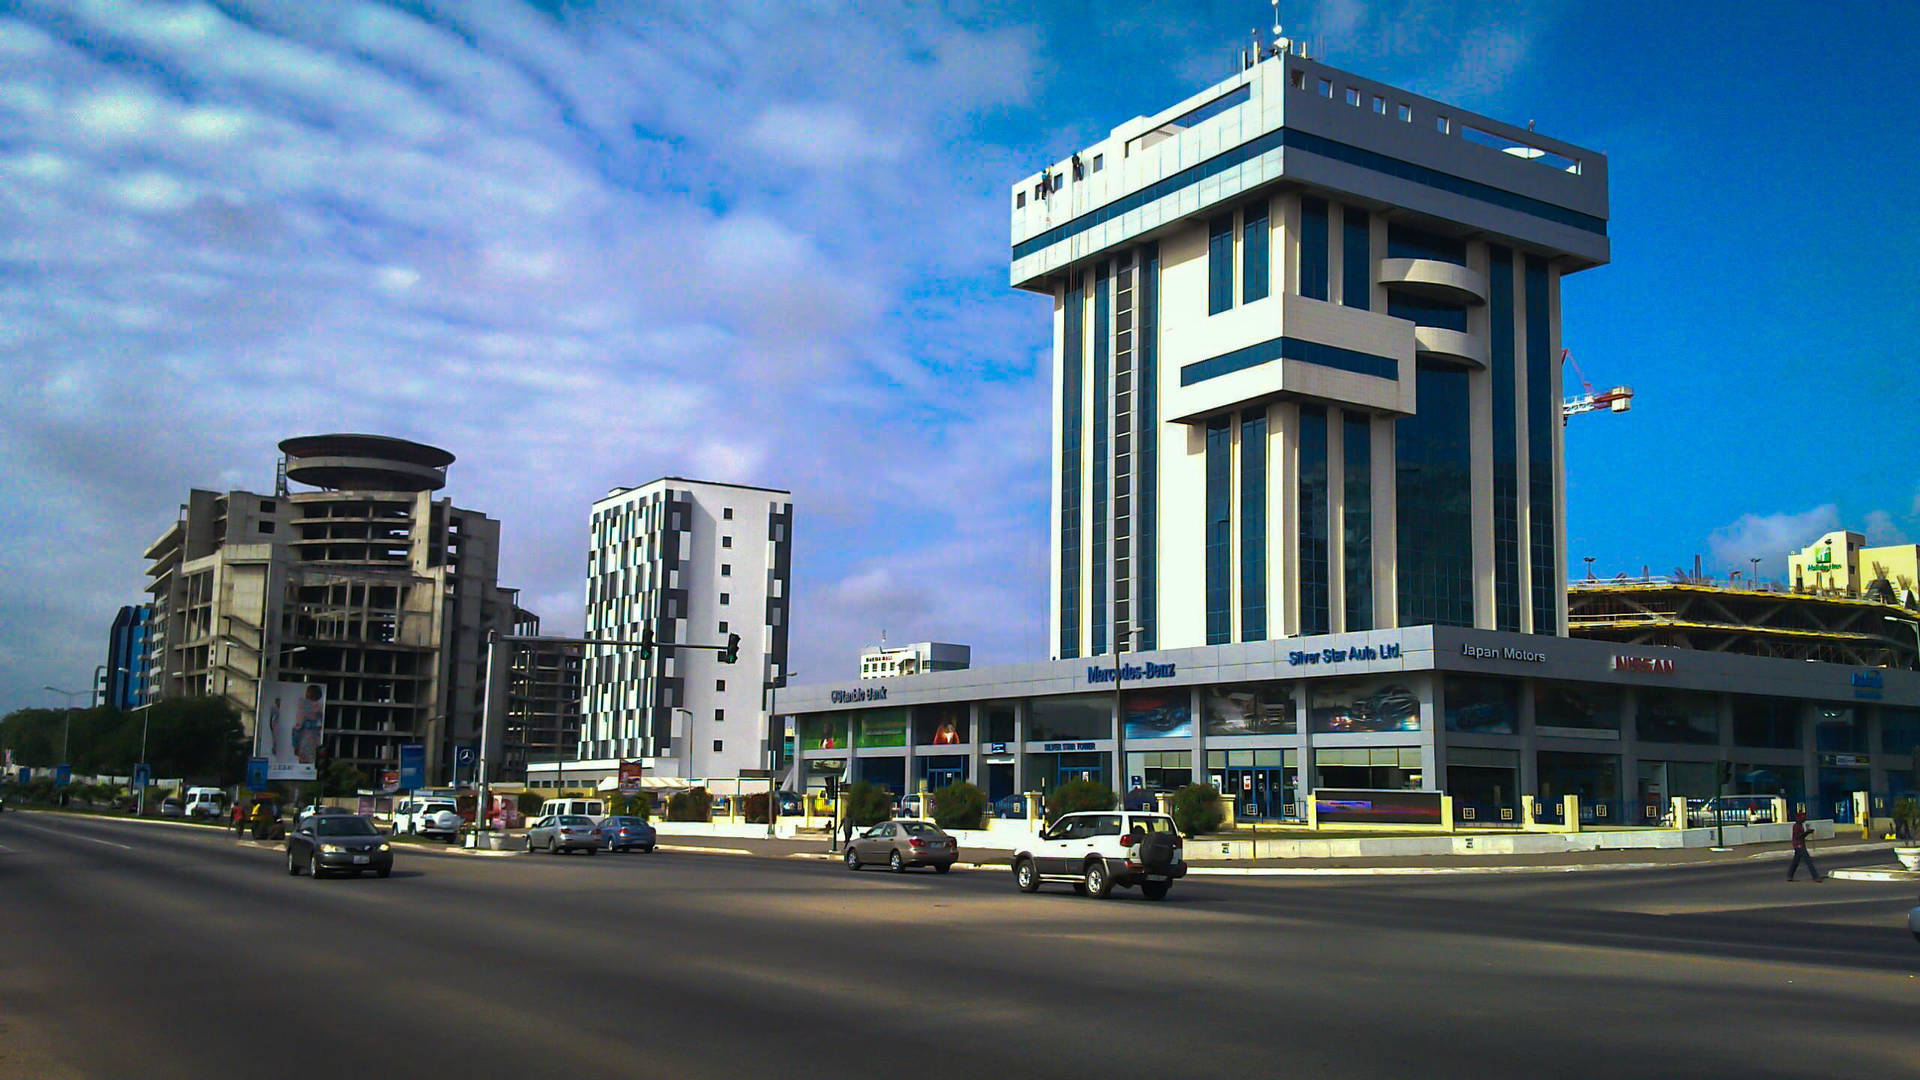 Ghana Accra Business District Background